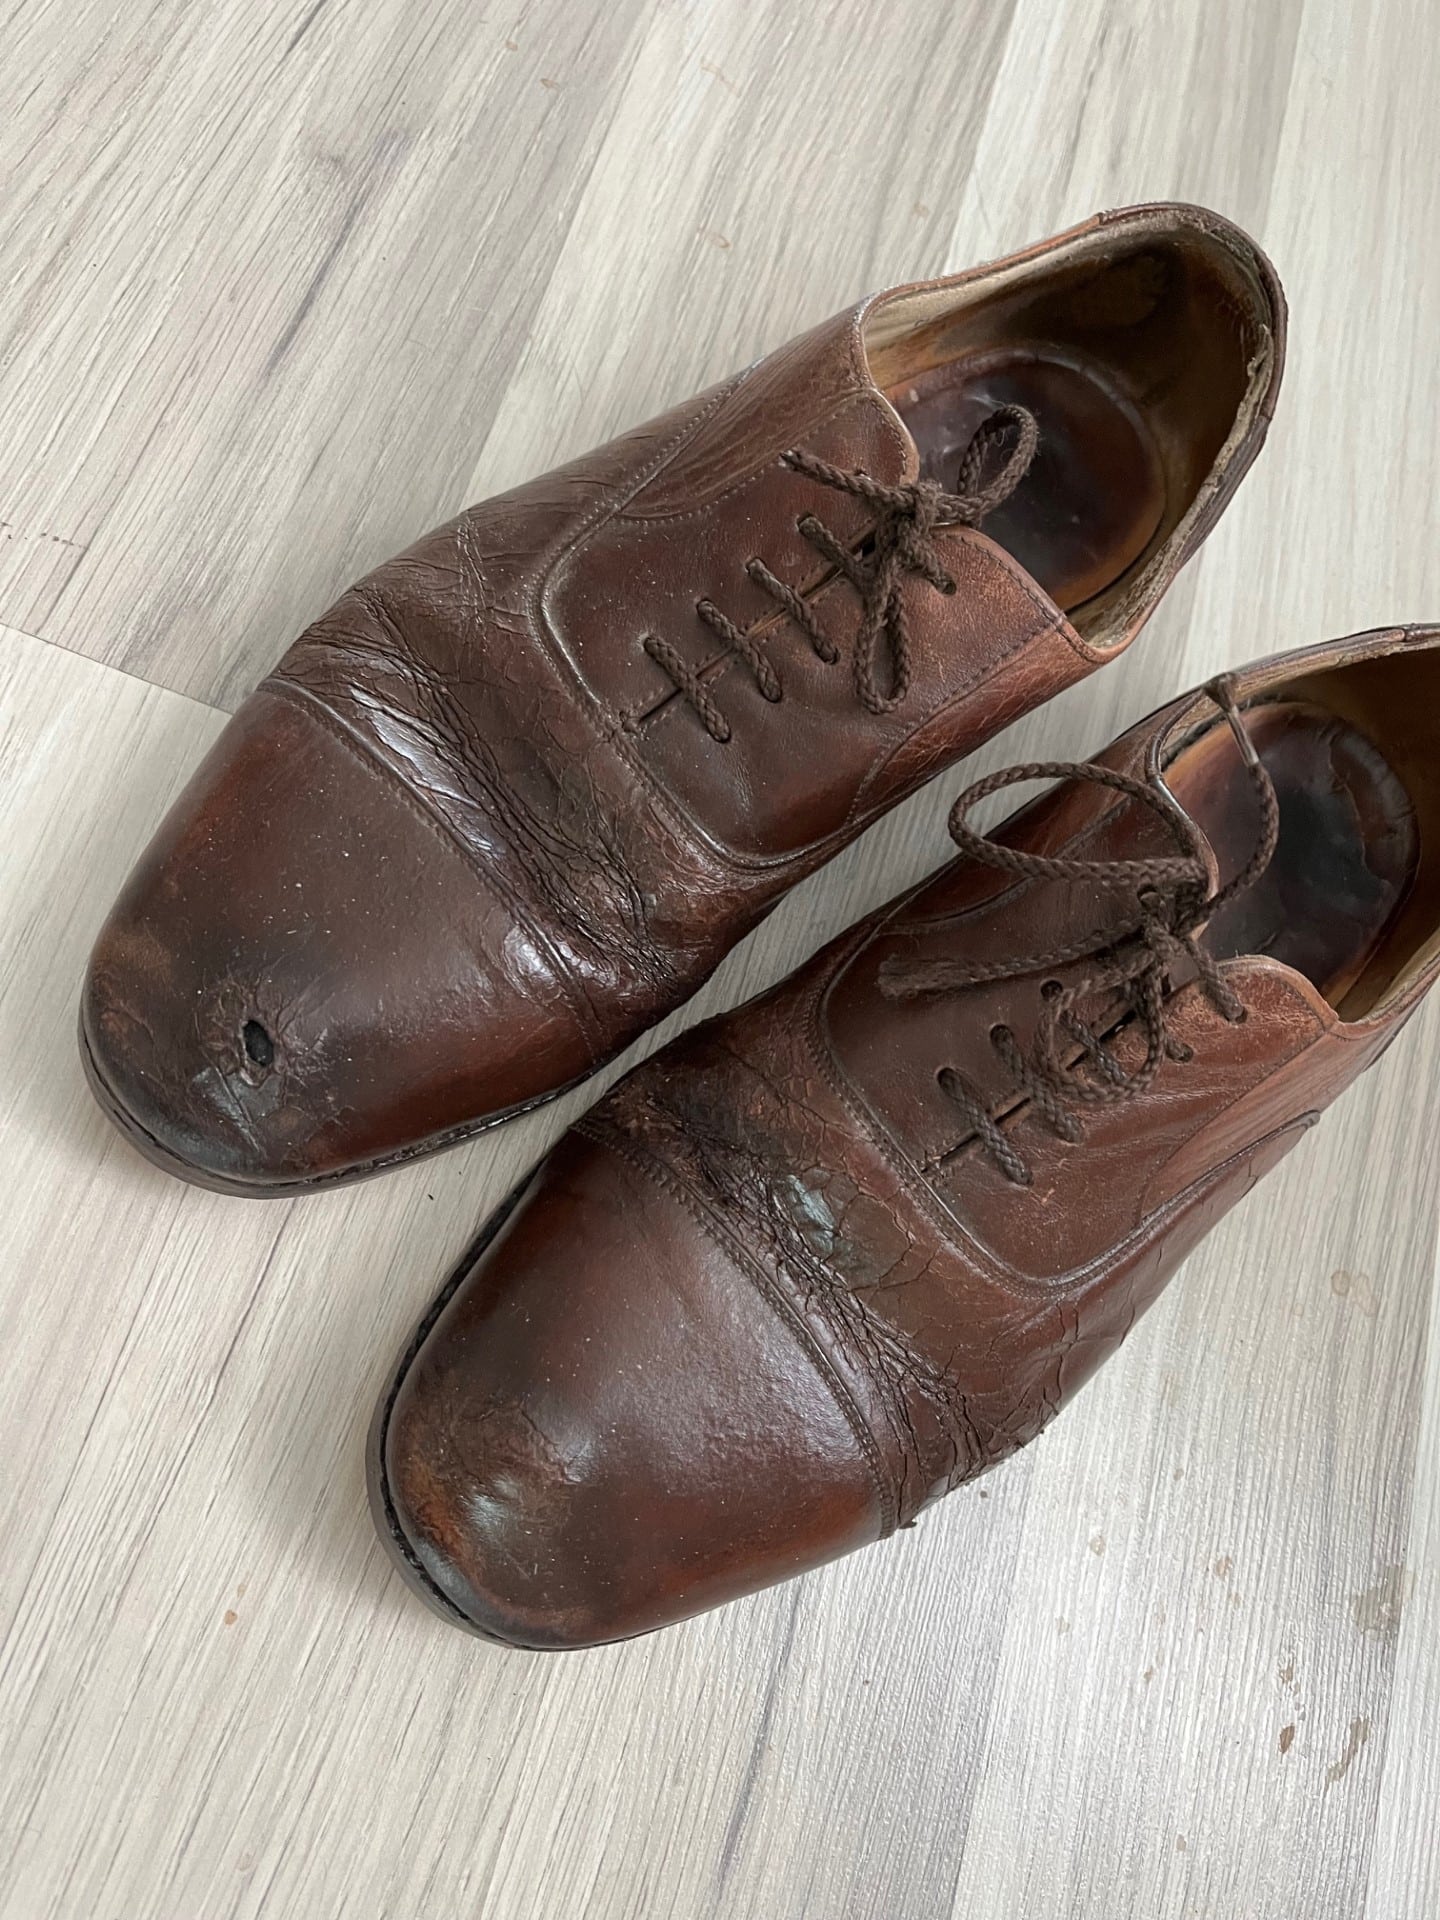 Shoes after repair. Conditioned, polished and shining. New soles and heels and a small patch (known as a King Charles III patch) help mask the hole in the toe.